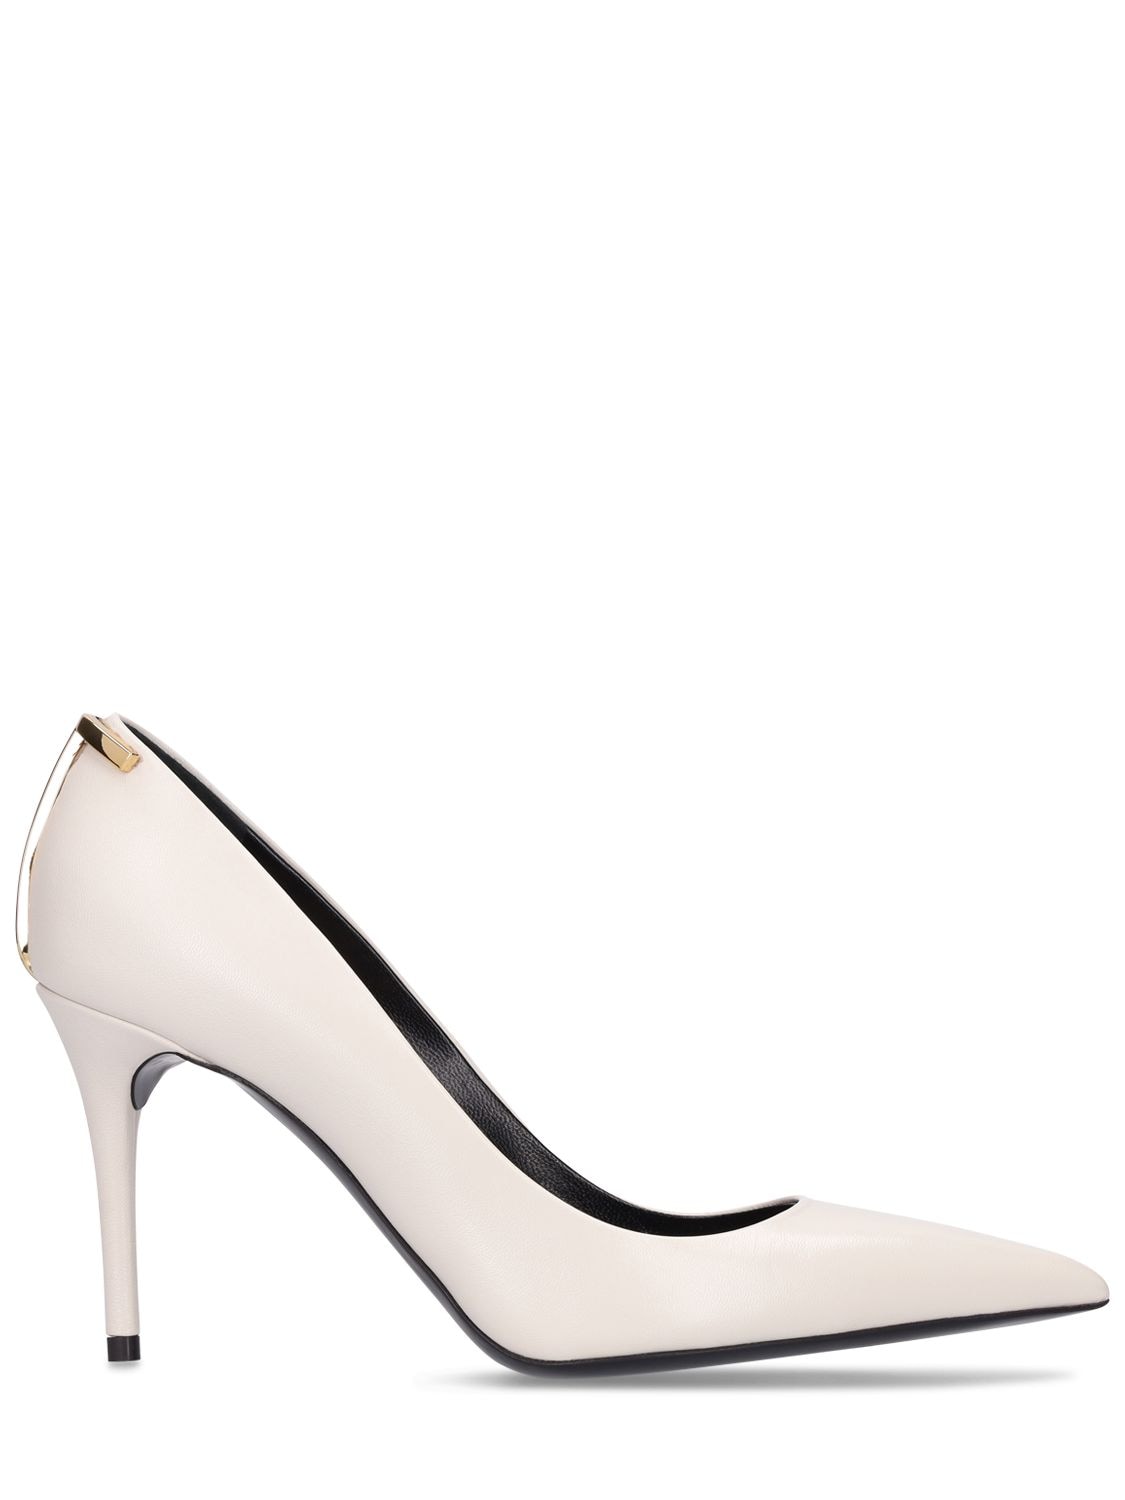 TOM FORD 85MM ICONIC T LEATHER PUMPS